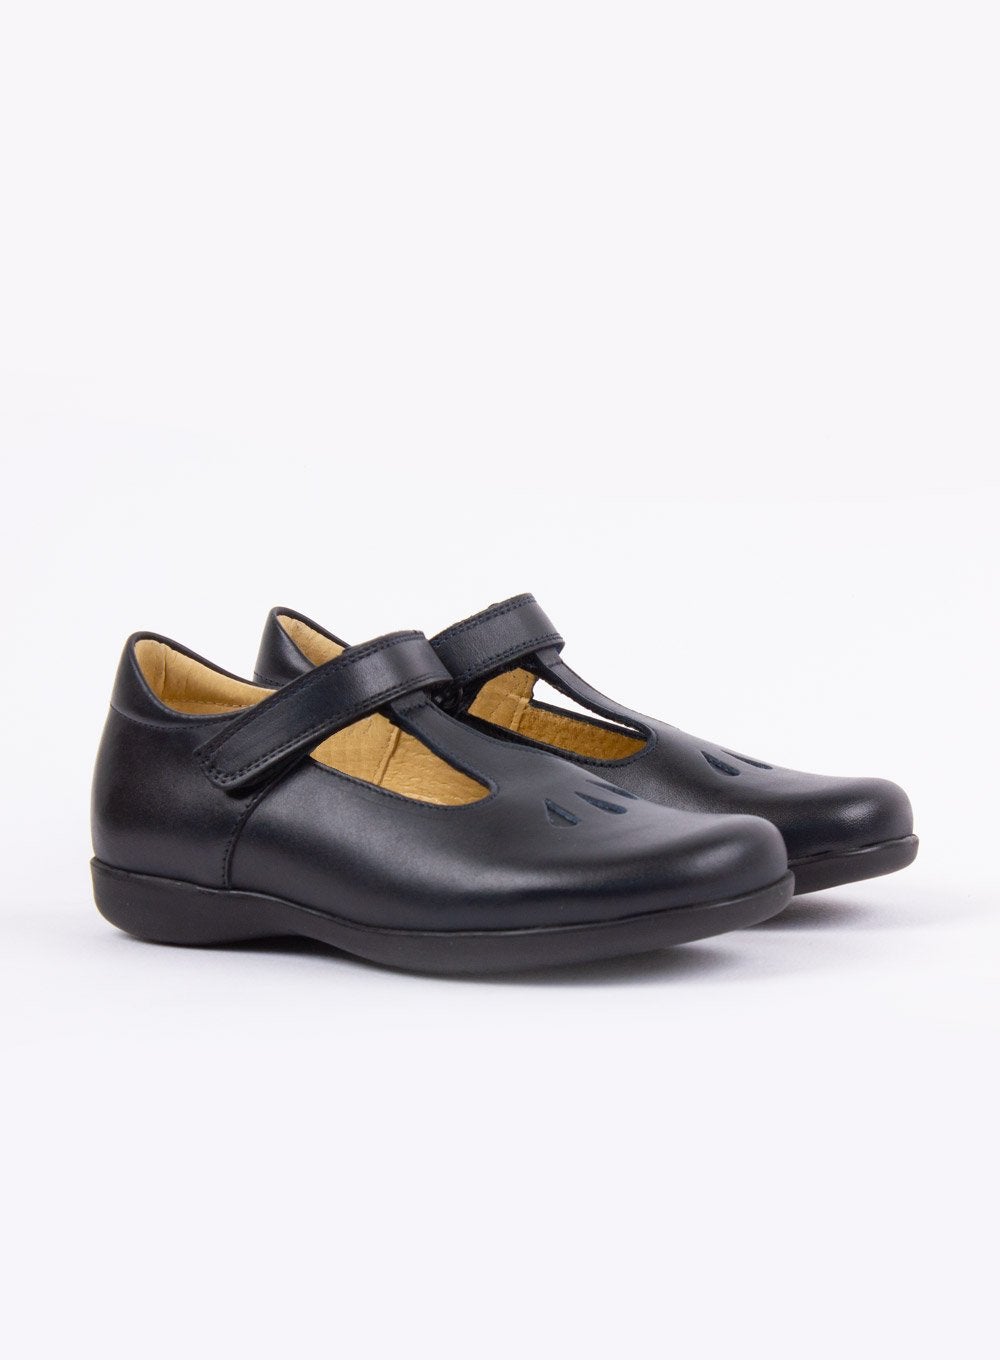 Hampton Classics Evie School Shoes in Navy | Trotters Childrenswear